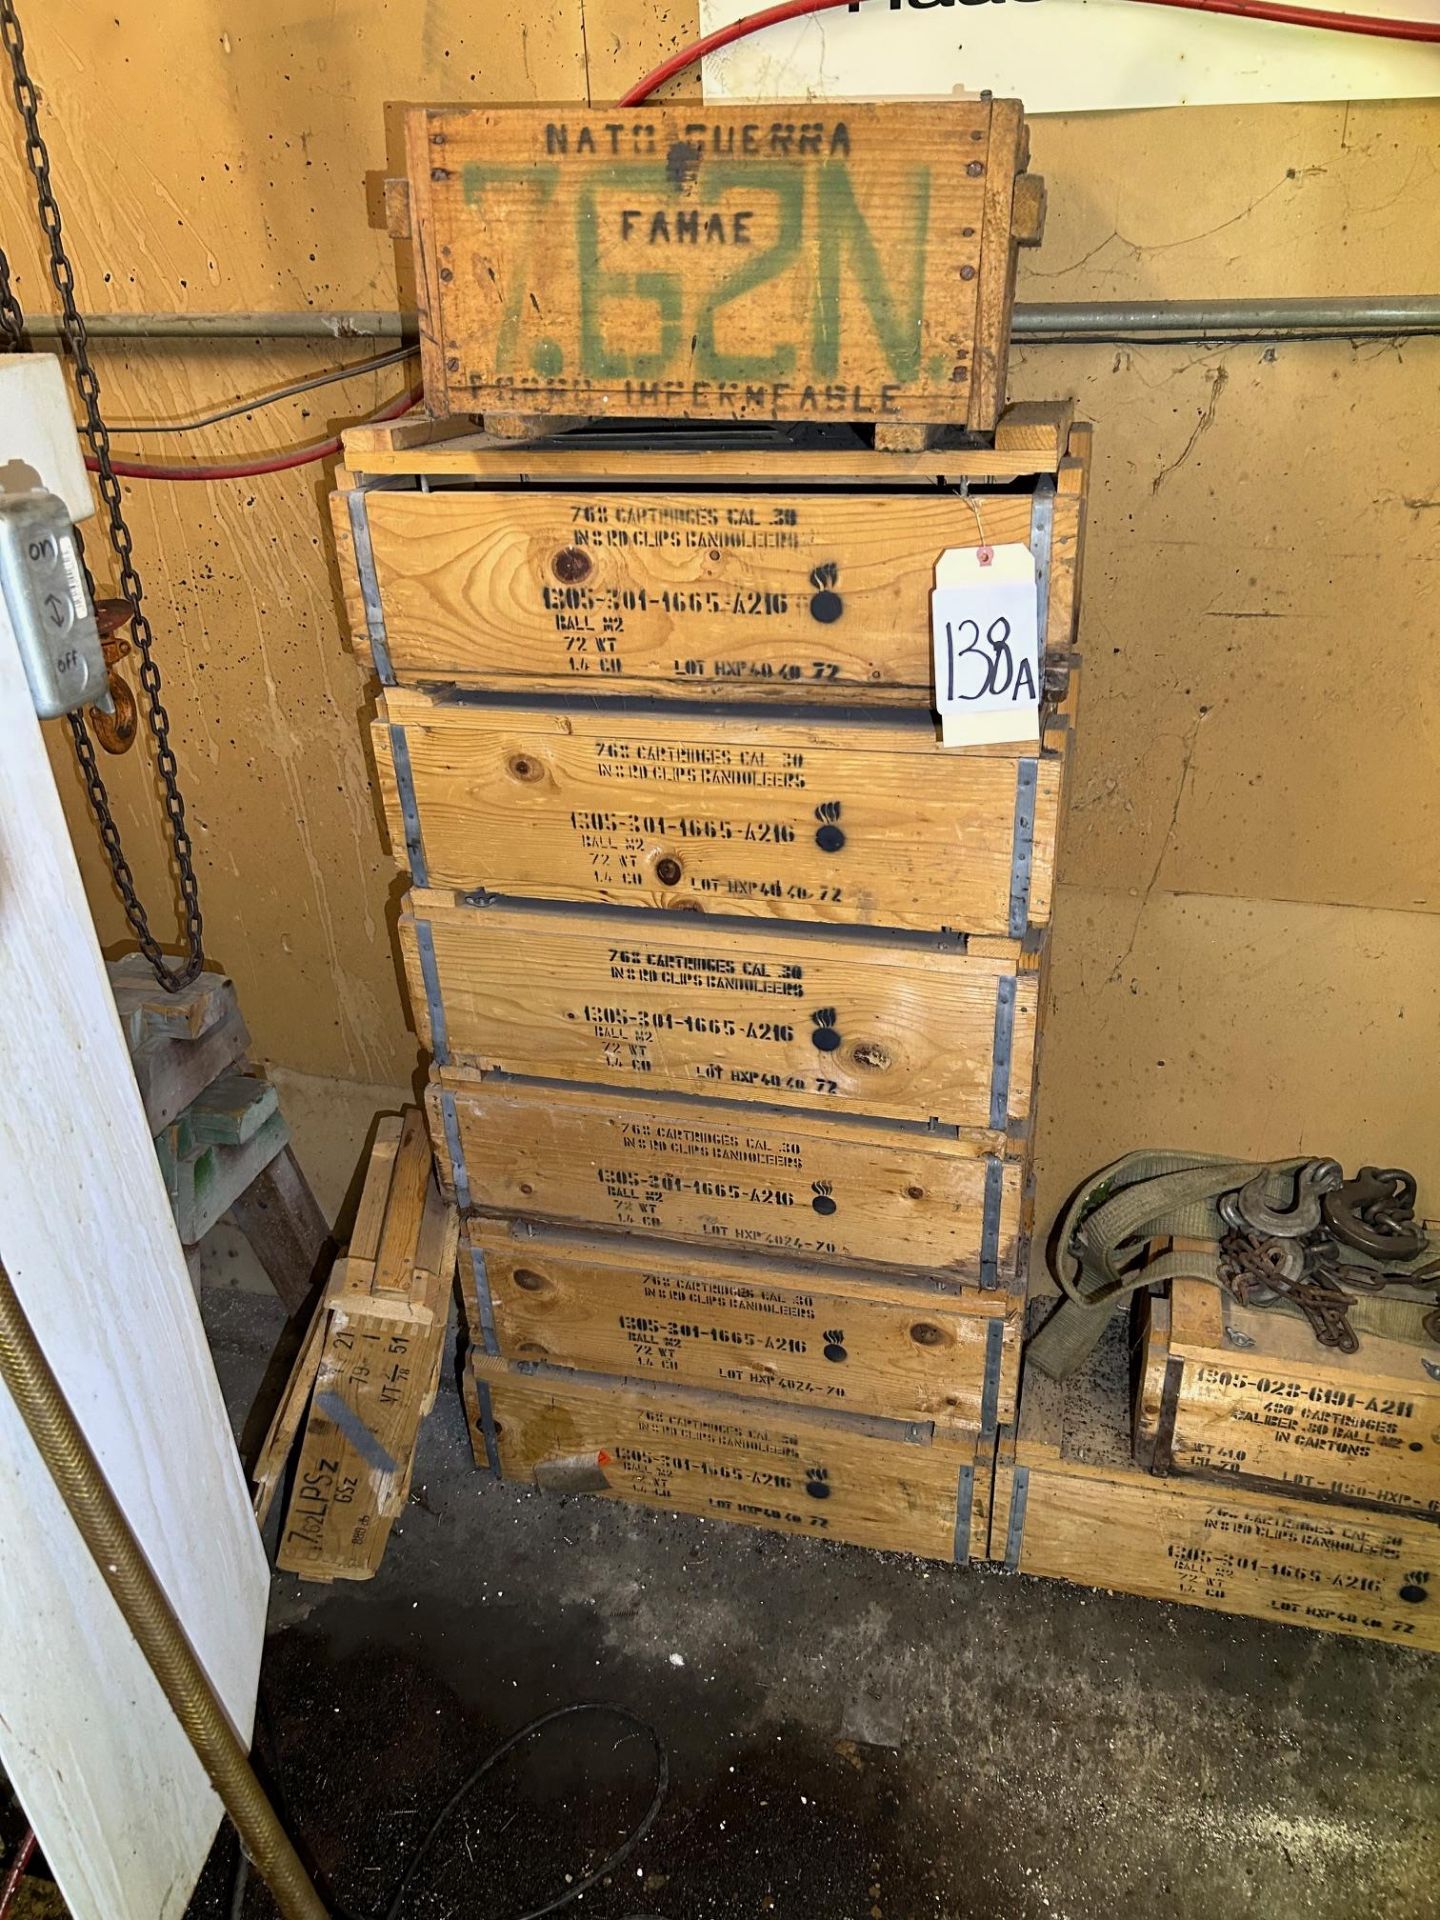 Lot of Wooden Ammunition Boxes (Empty no Contents in Boxes)